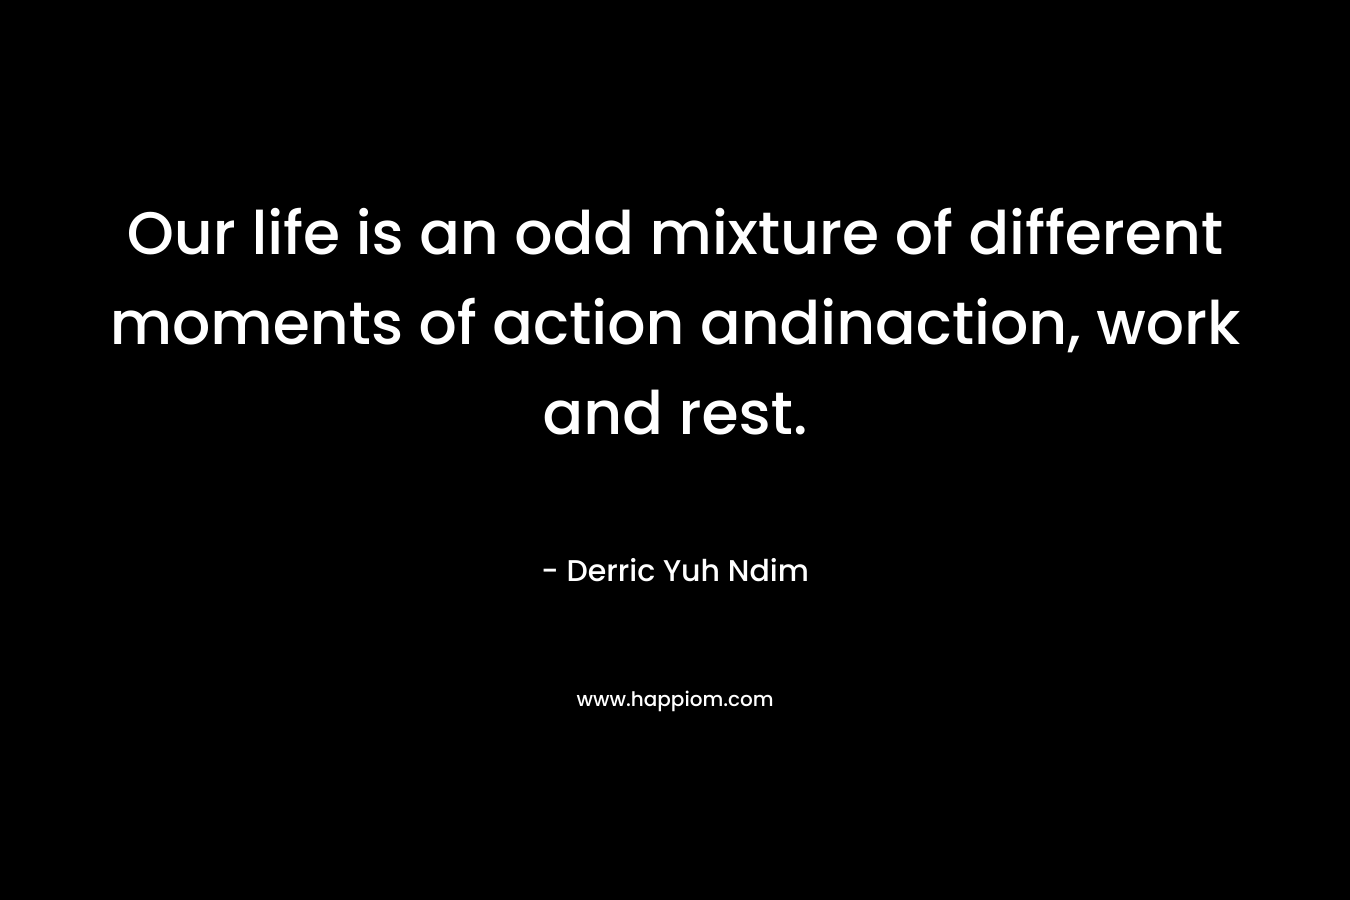 Our life is an odd mixture of different moments of action andinaction, work and rest. – Derric Yuh Ndim